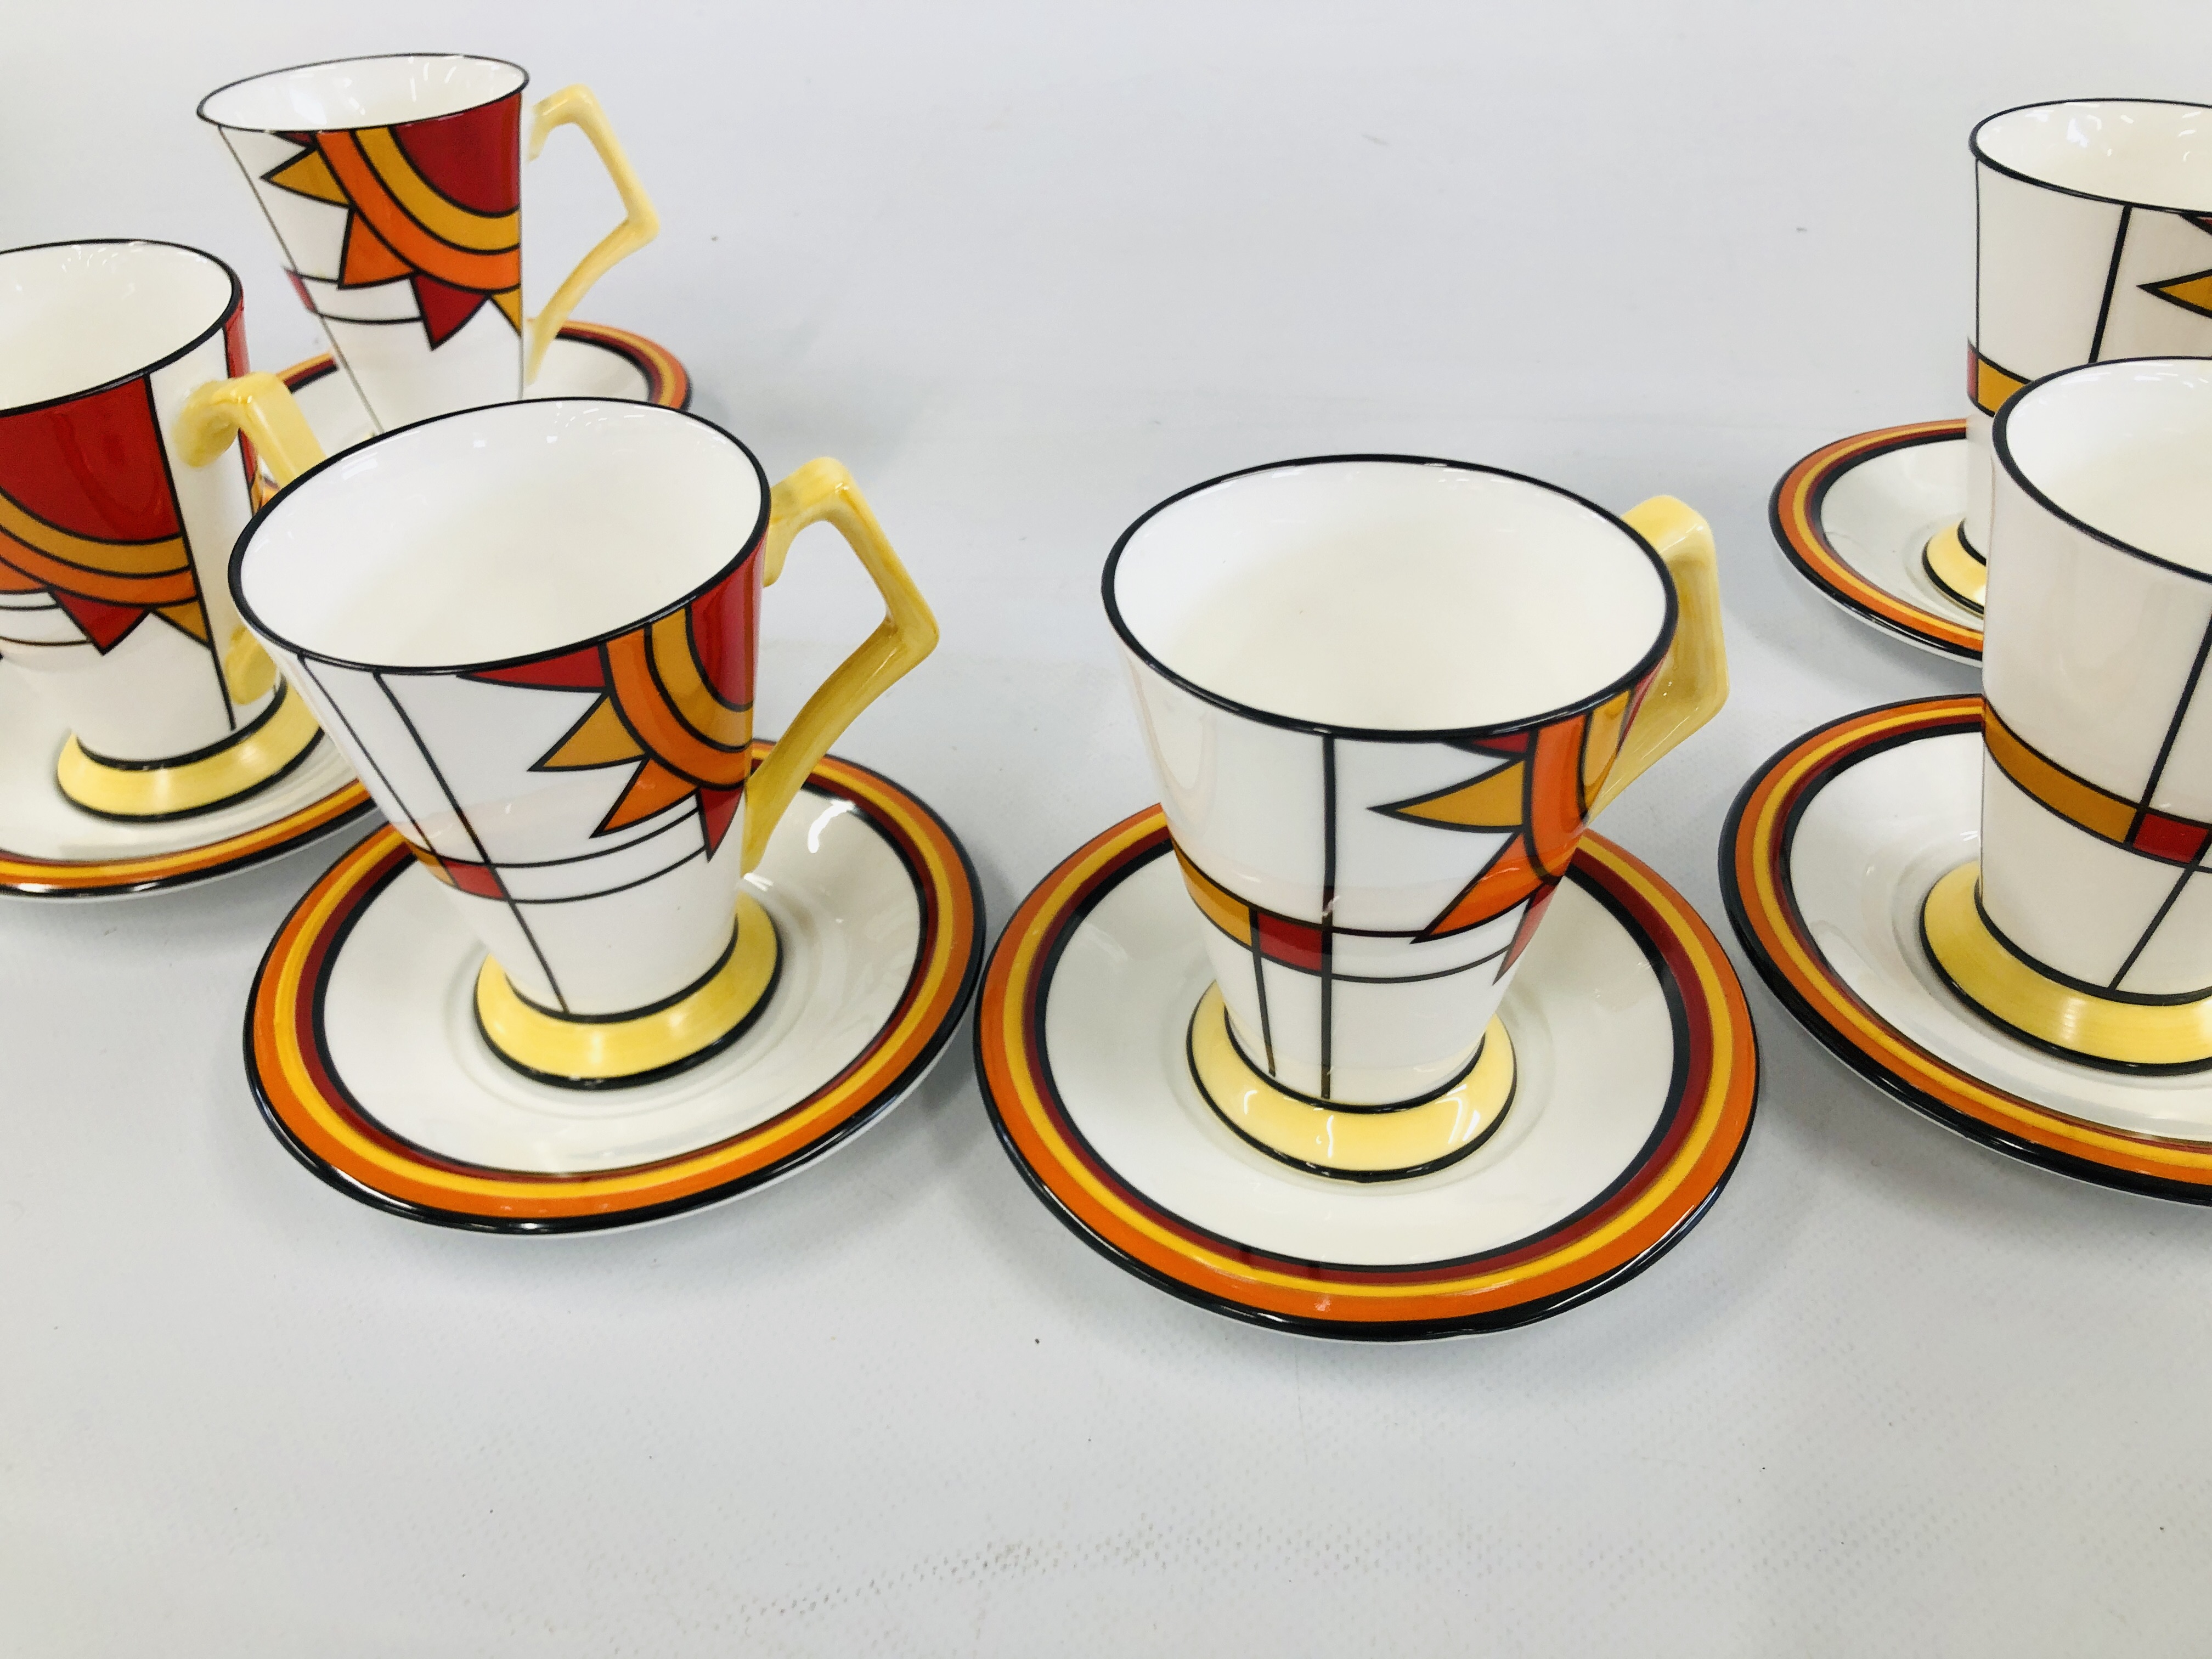 A MODERN ABSTRACT DESIGN 12 PIECE COFFEE CUP SET BY "THE BRIAN WOOD COLLECTION" ALONG WITH A LARGE - Image 6 of 7